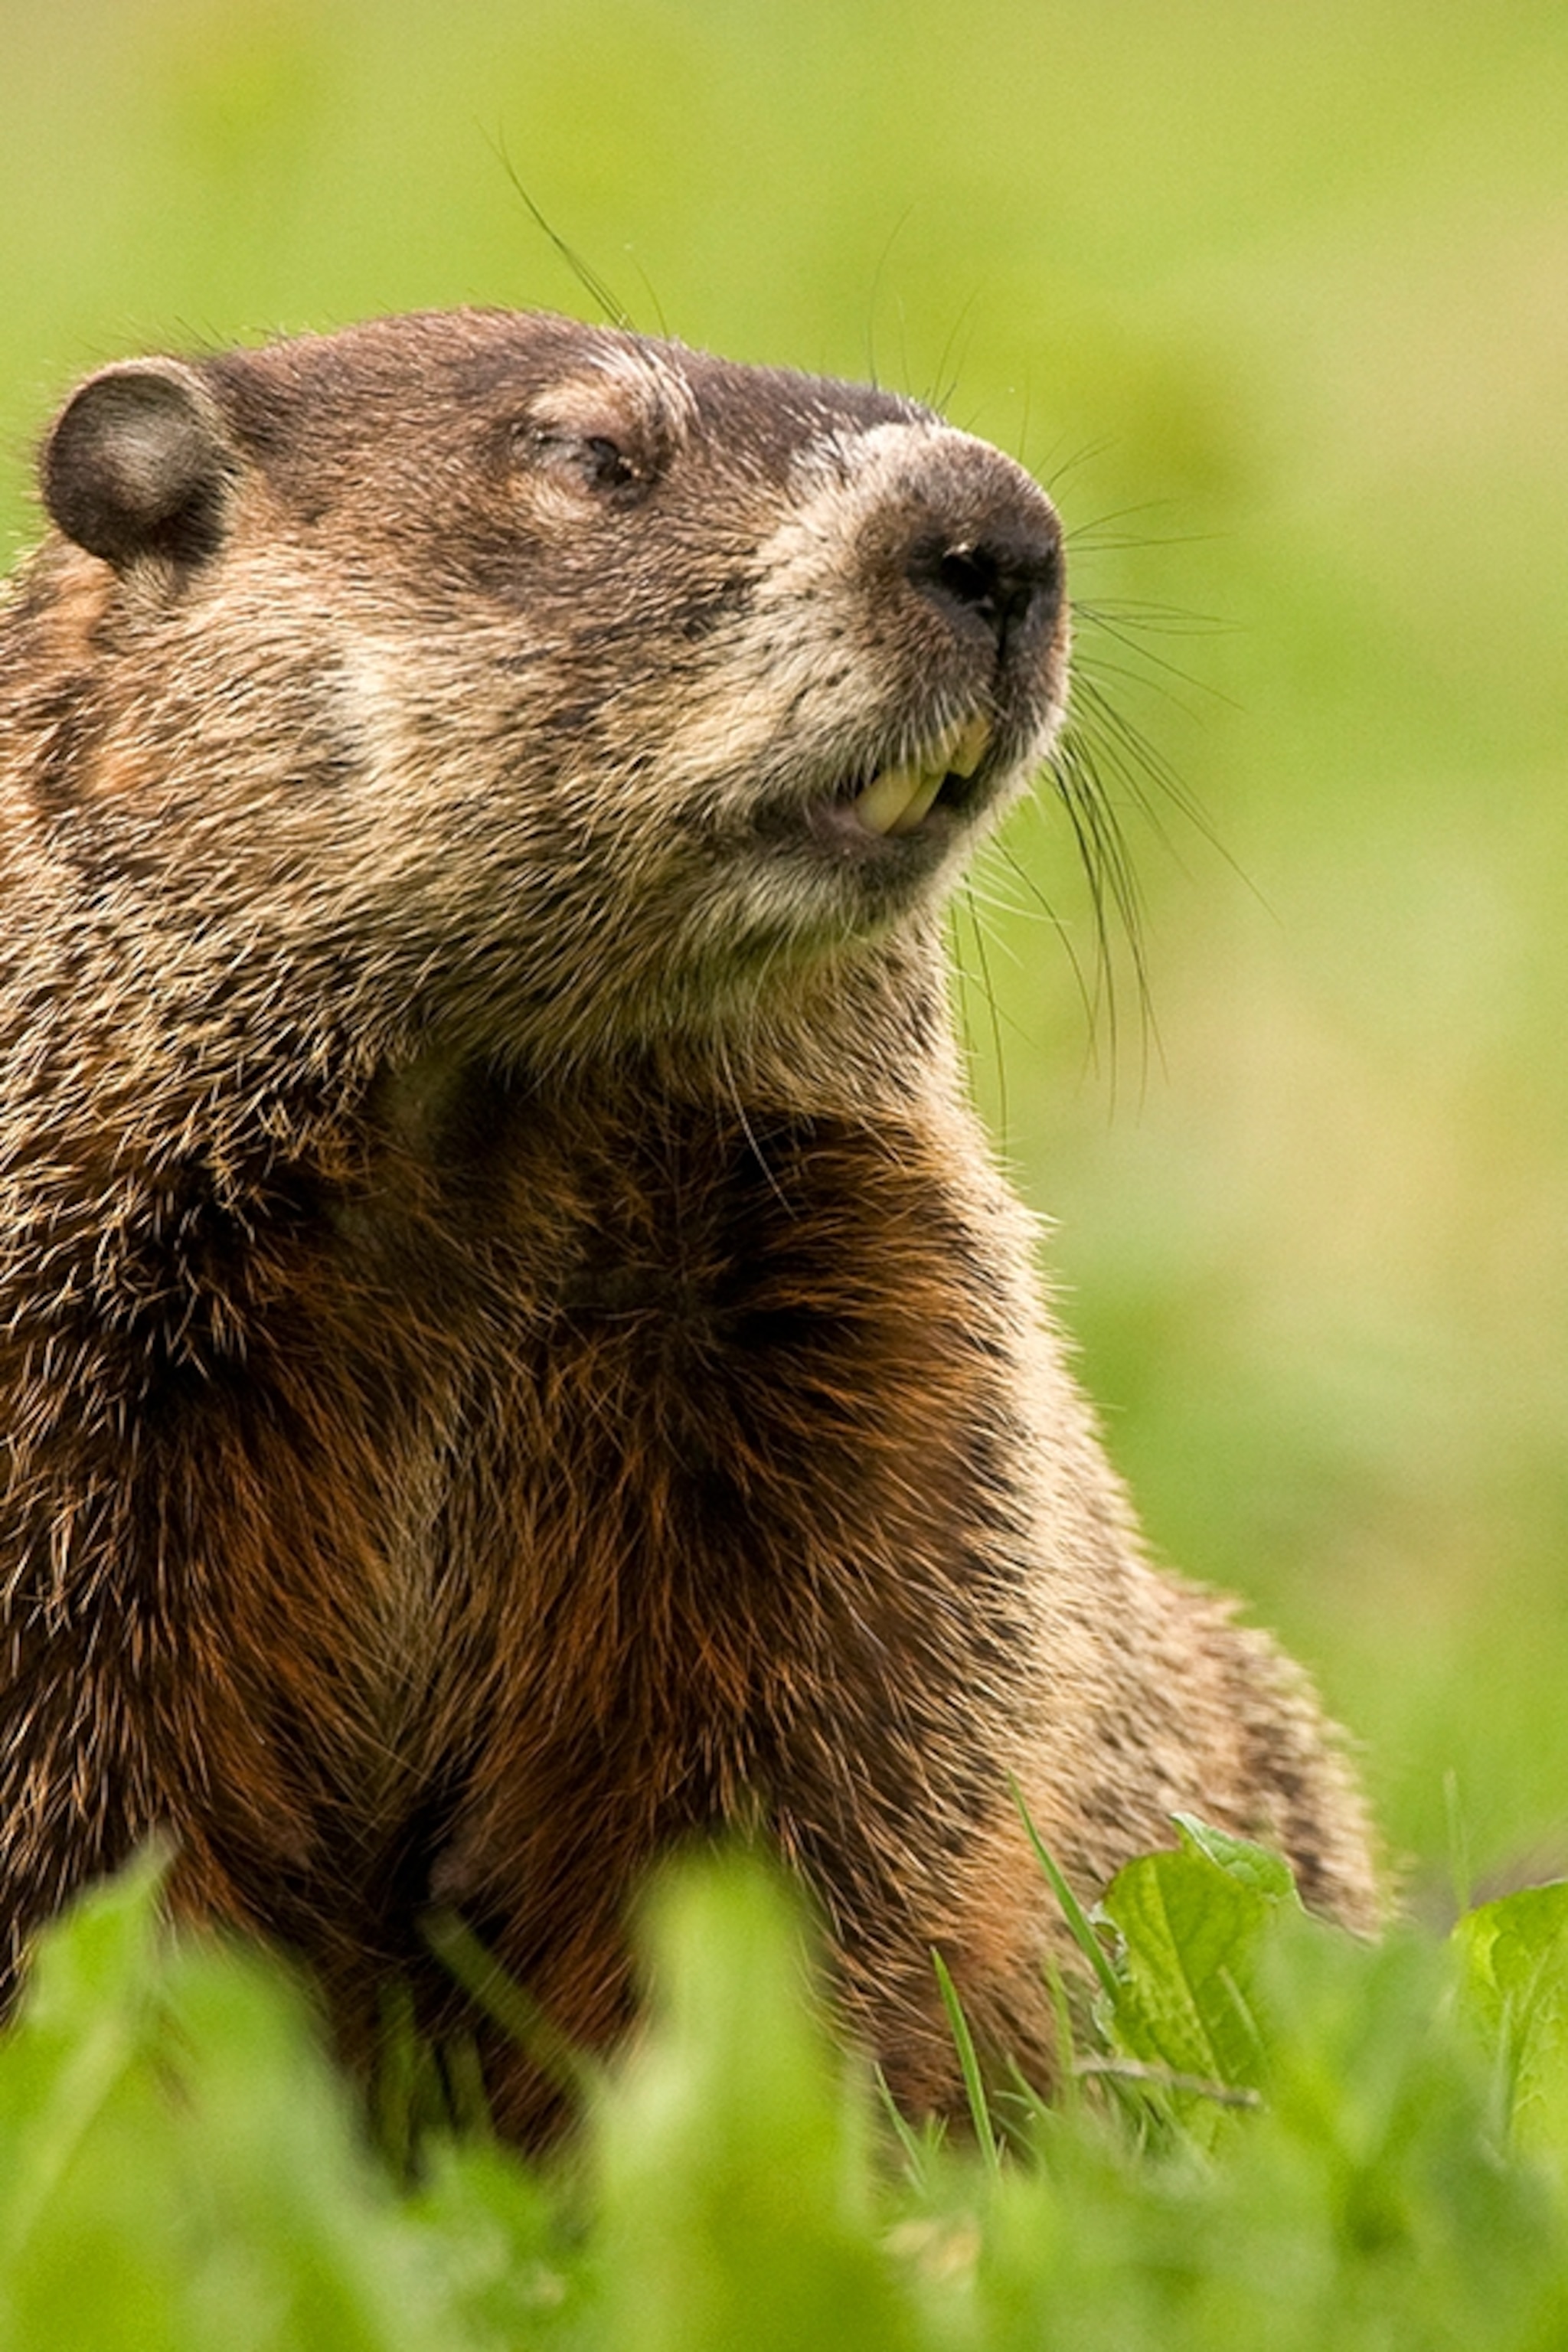 Groundhog Photo and Facts